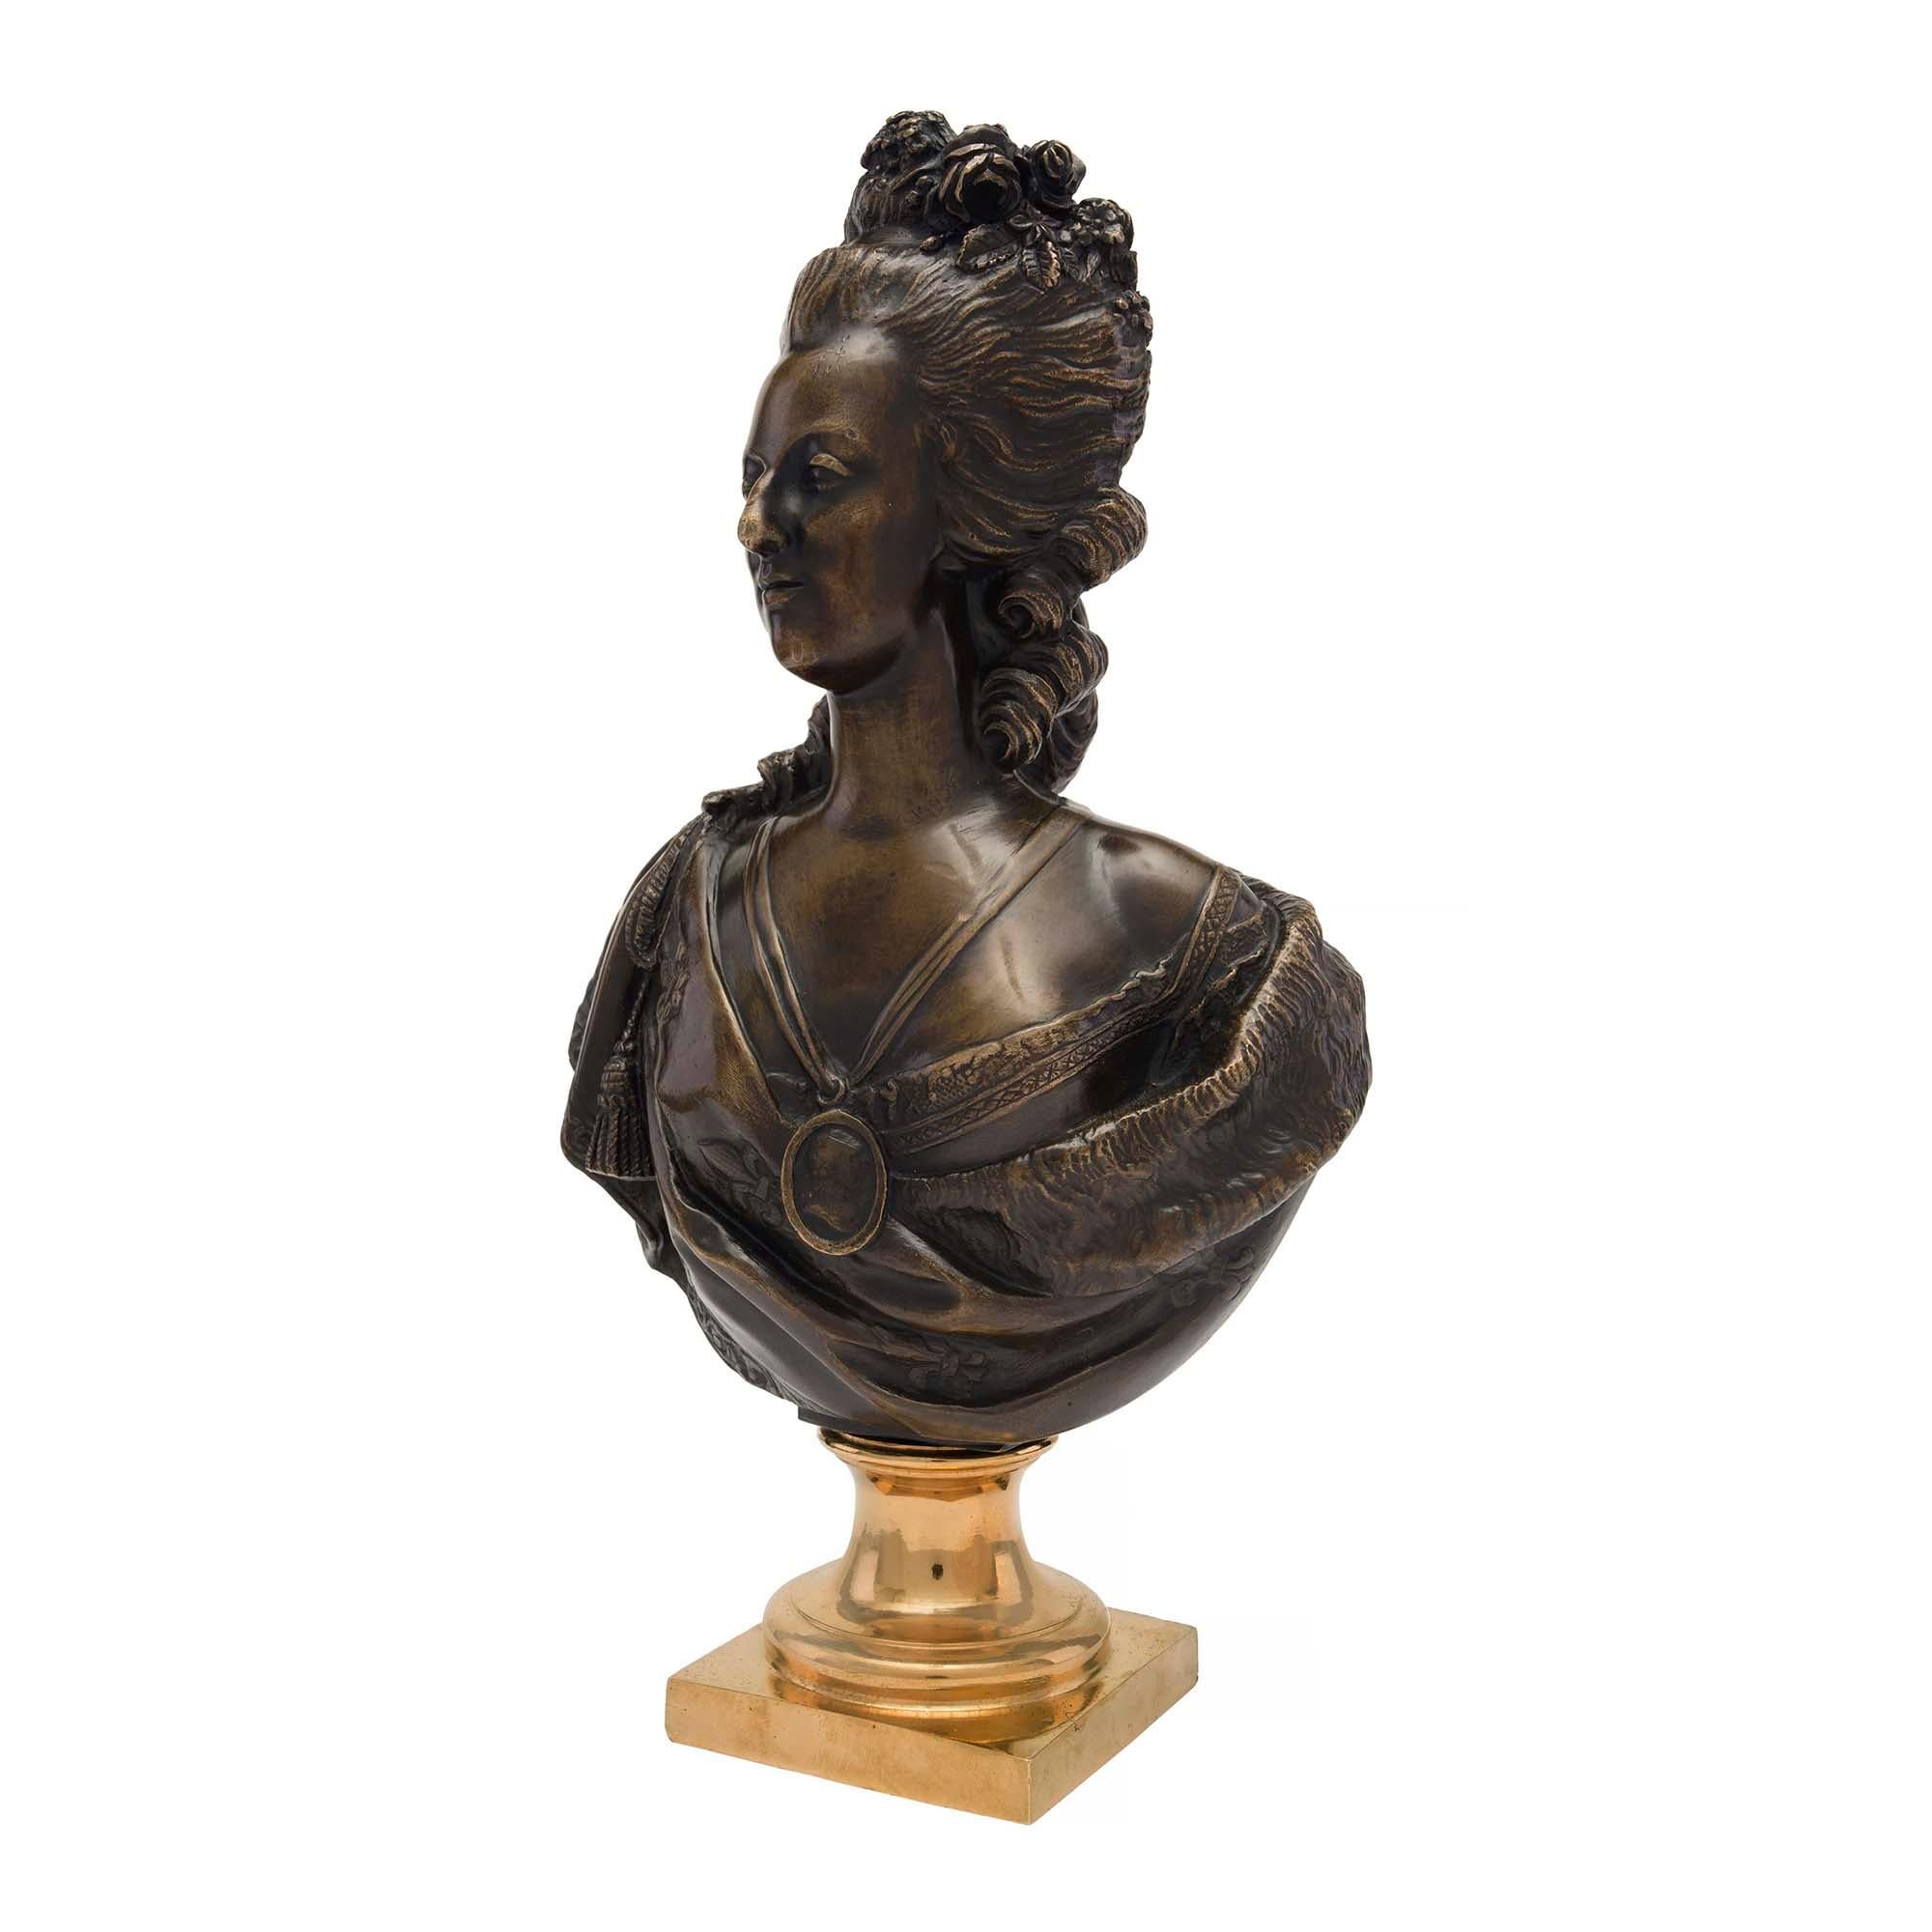 A beautiful French 19th century patinated bronze and ormolu bust of Marie Antoinette signed by Houdon. The high quality bust is raised by an ormolu square base with a mottled socle pedestal. The richly detailed patinated bronze bust of Marie